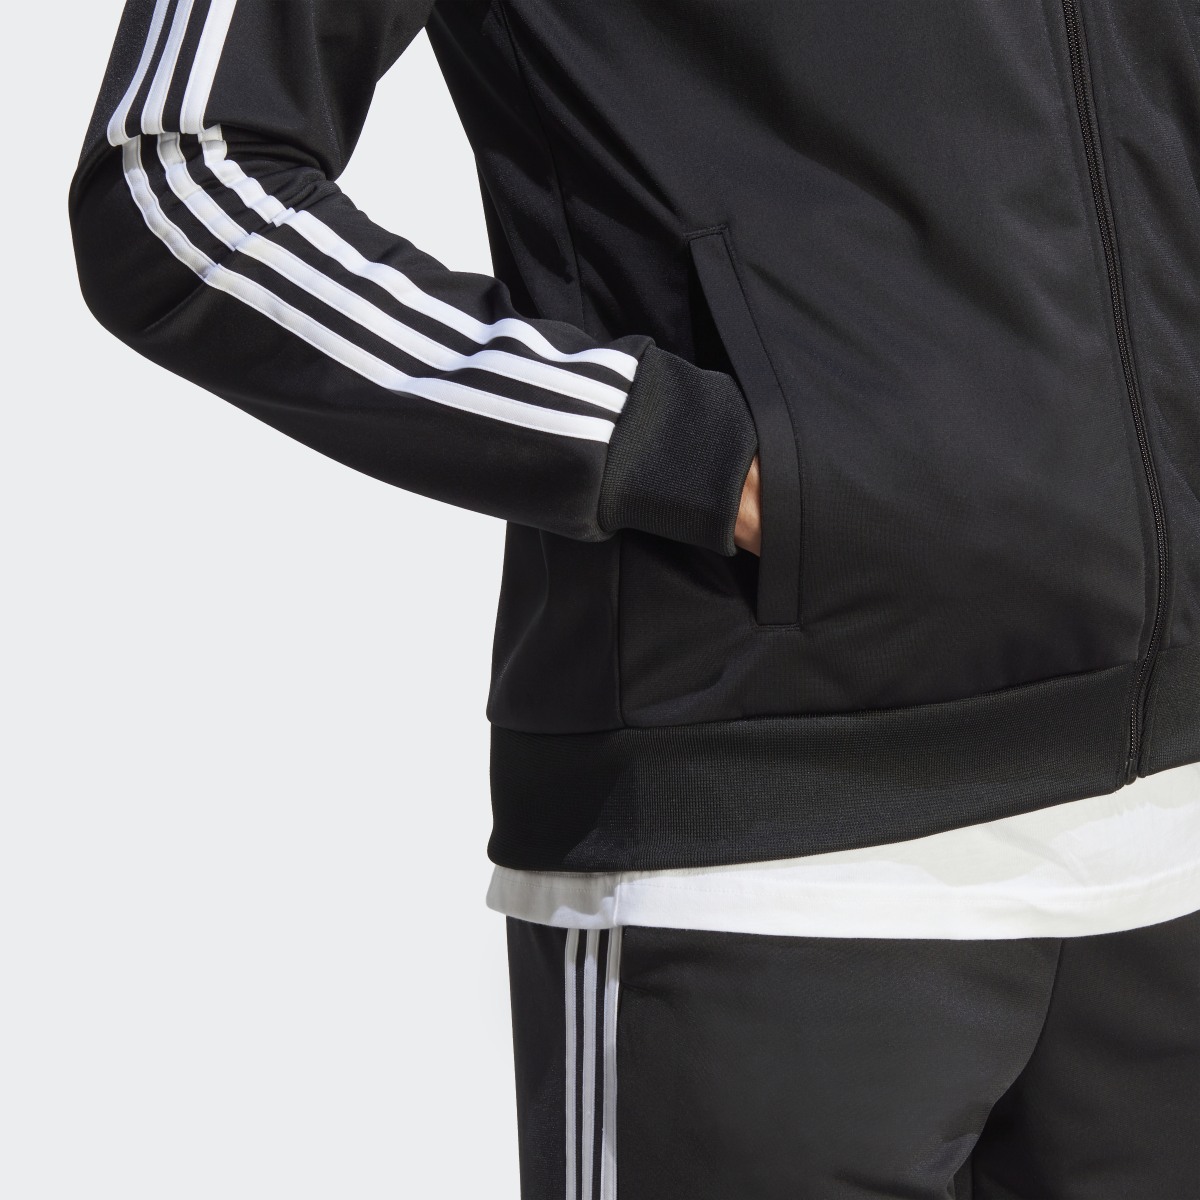 Adidas Basic 3-Stripes Tricot Track Suit. 11